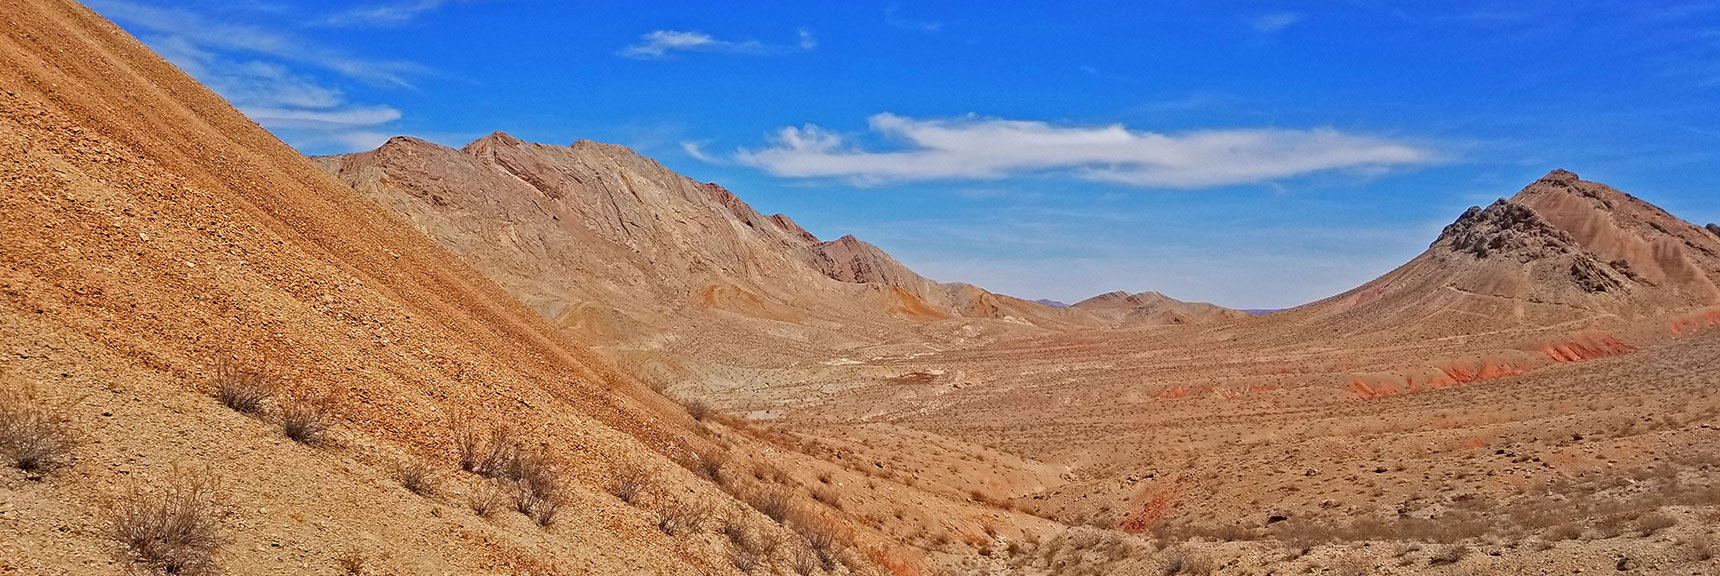 First View of Sunrise Mountain (left) from the Saddle at the Top of the Gully | Sunrise Mountain, Las Vegas, Nevada